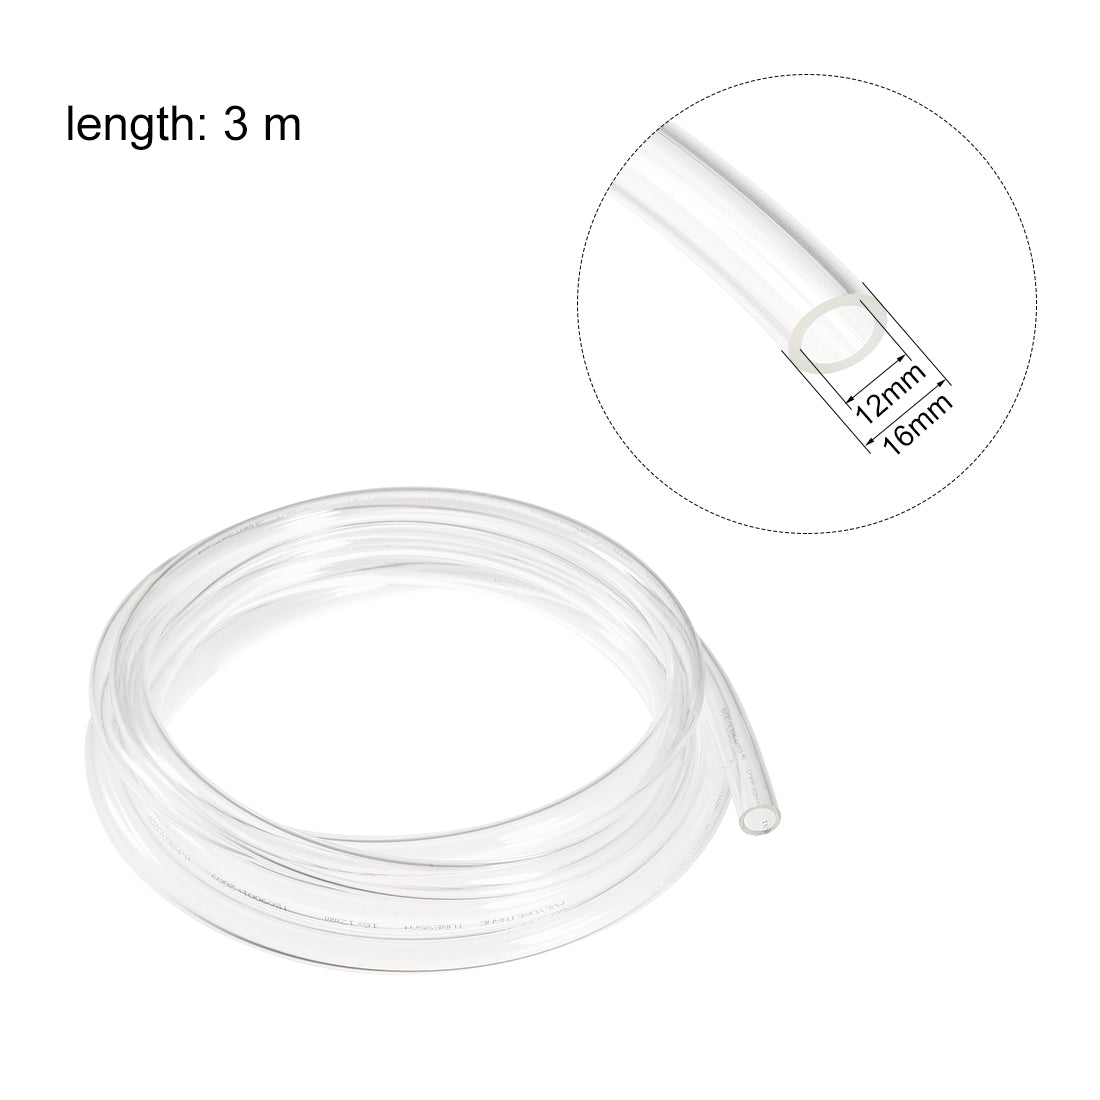 Uxcell Uxcell 16mm OD 12mm ID 1m Long Clear PU Air Tubing Pipe Hose for Air Line Tube Fluid Transfer Pneumatic Tubing